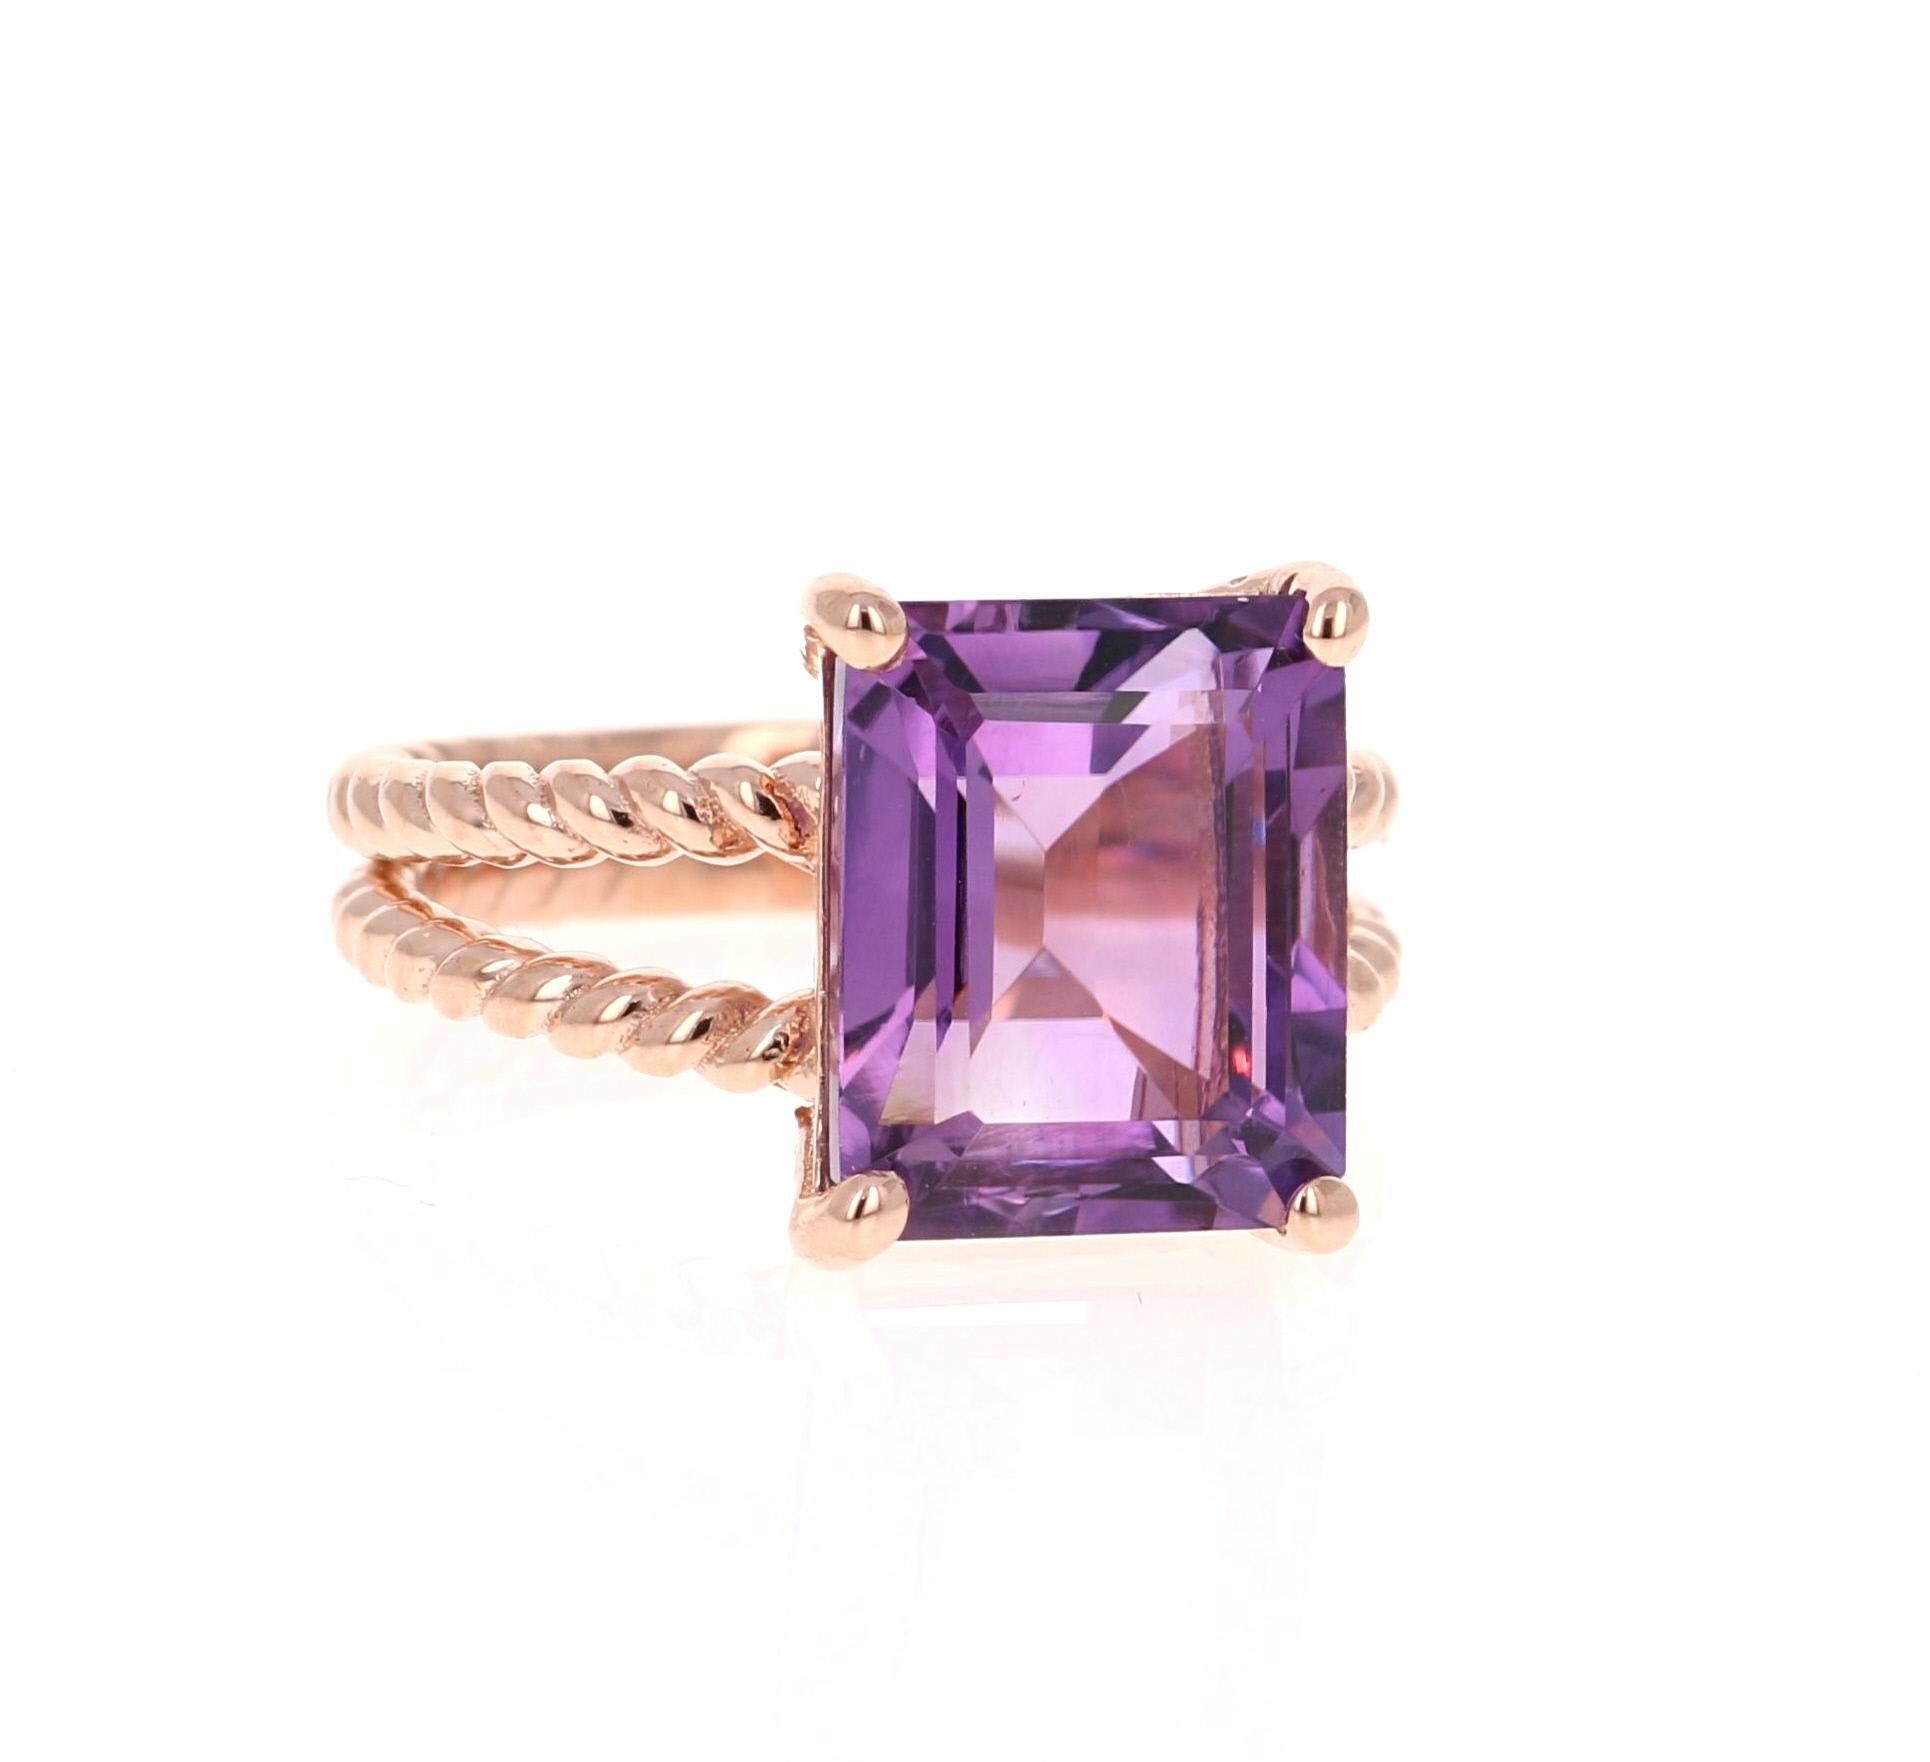 This Designer inspired Ring has a bright and vivid Emerald Cut Amethyst in the center that weighs 6.70 carats. 
The setting is beautifully crafted in 14K Rose Gold and weighs approximately 5.0 grams.
The ring is a size 7 and can be re-sized if